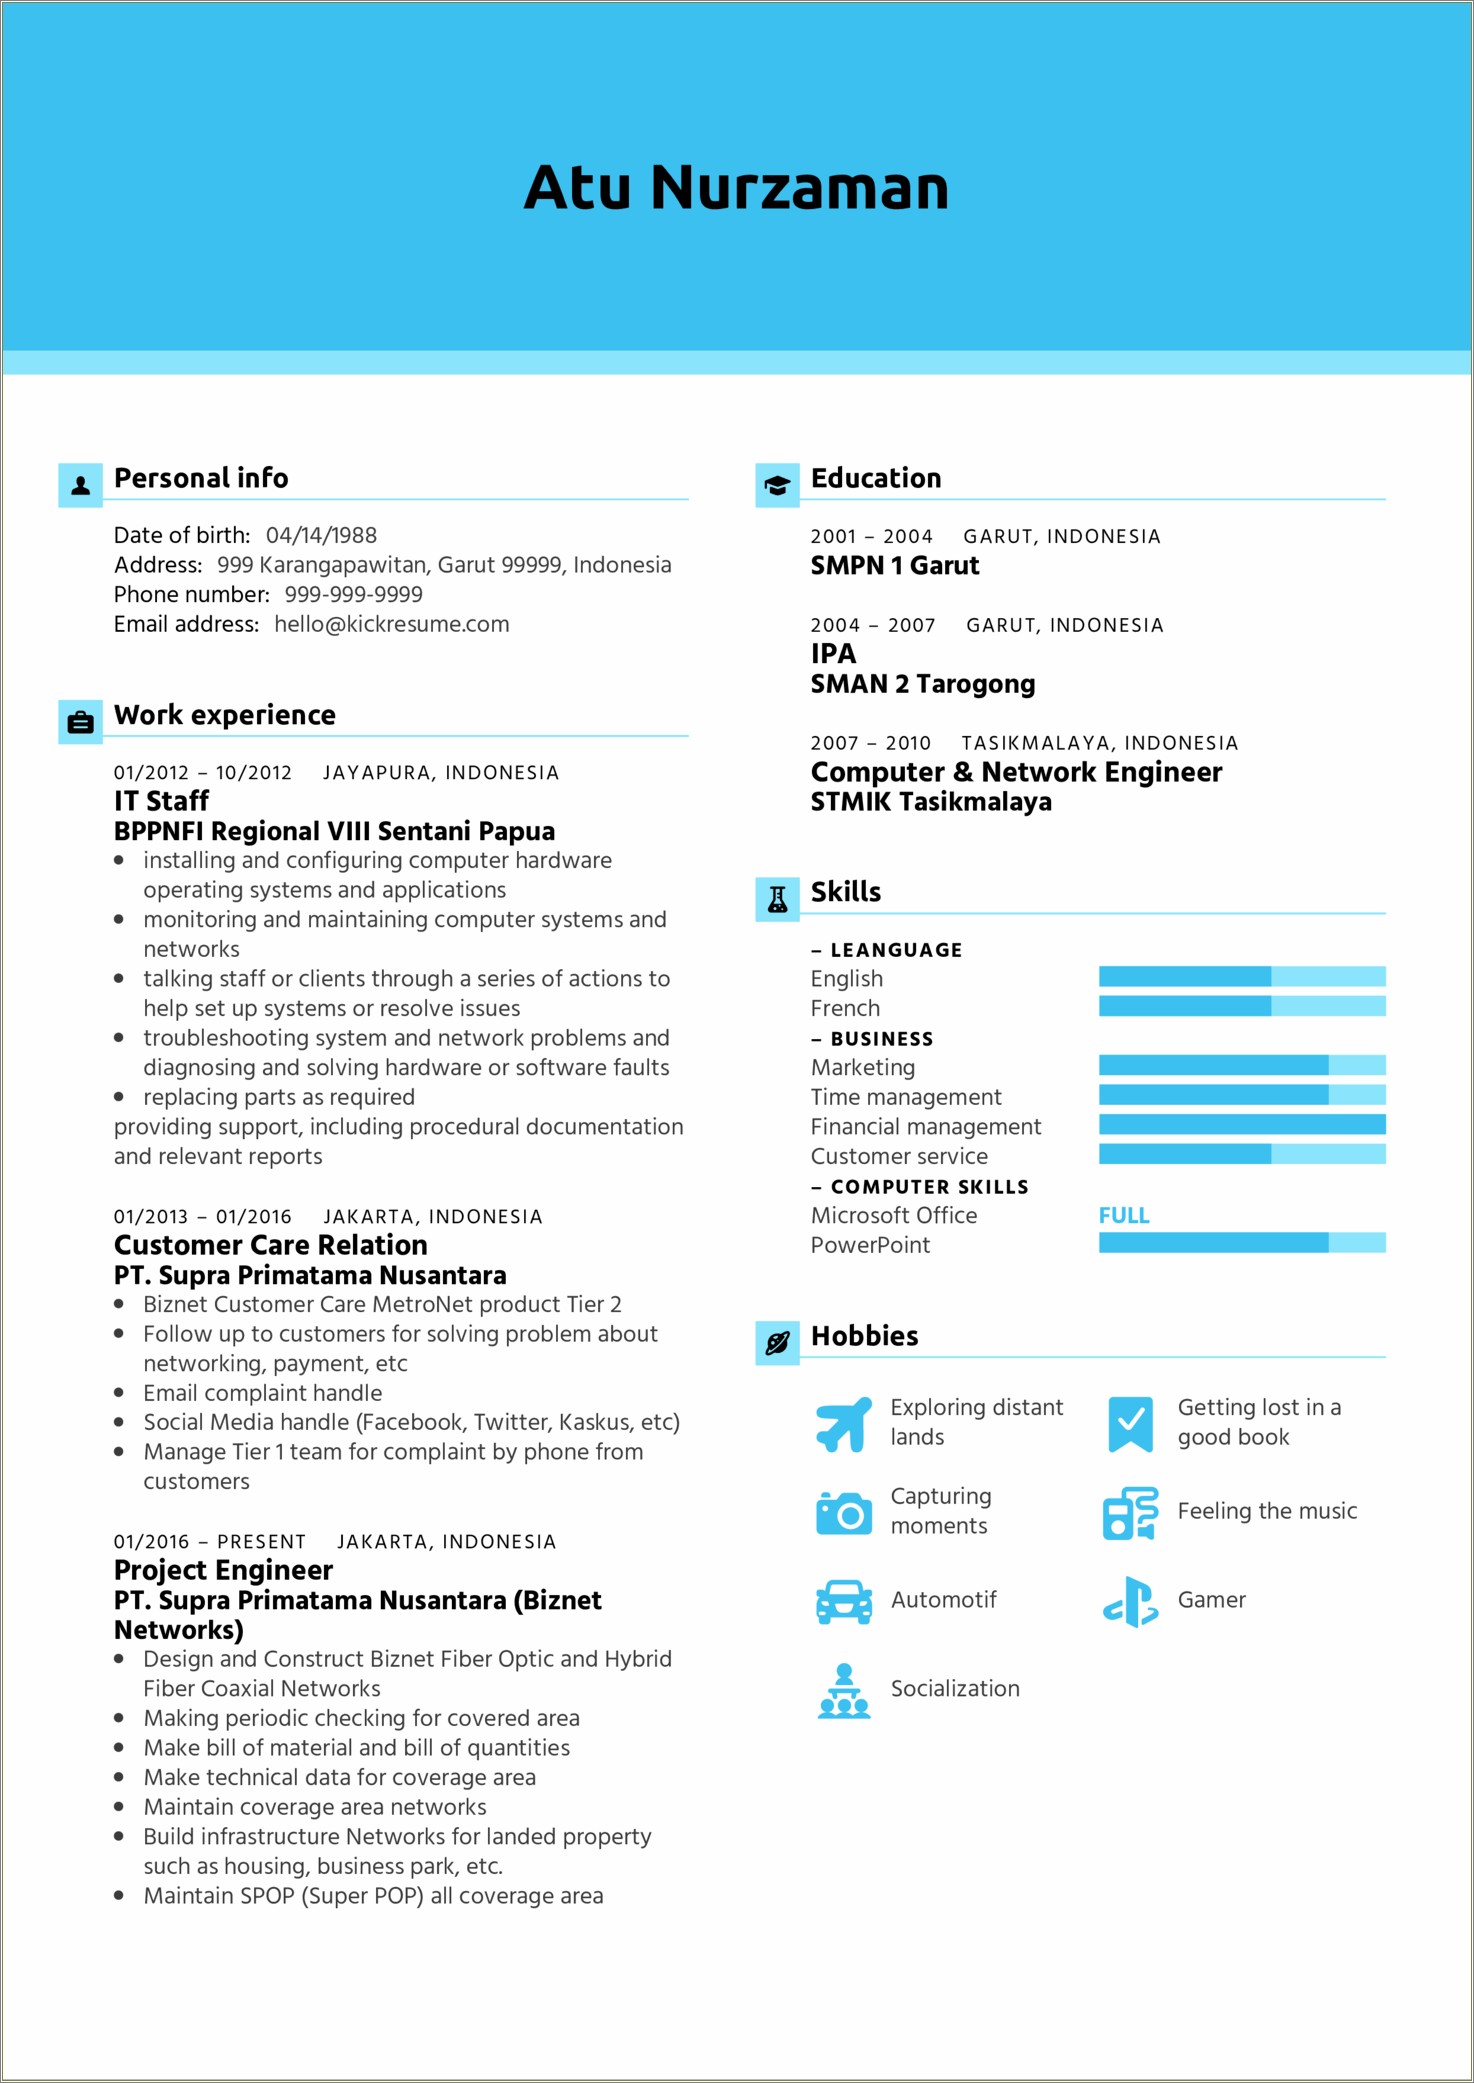 Information Technology Project Manager Resume Examples